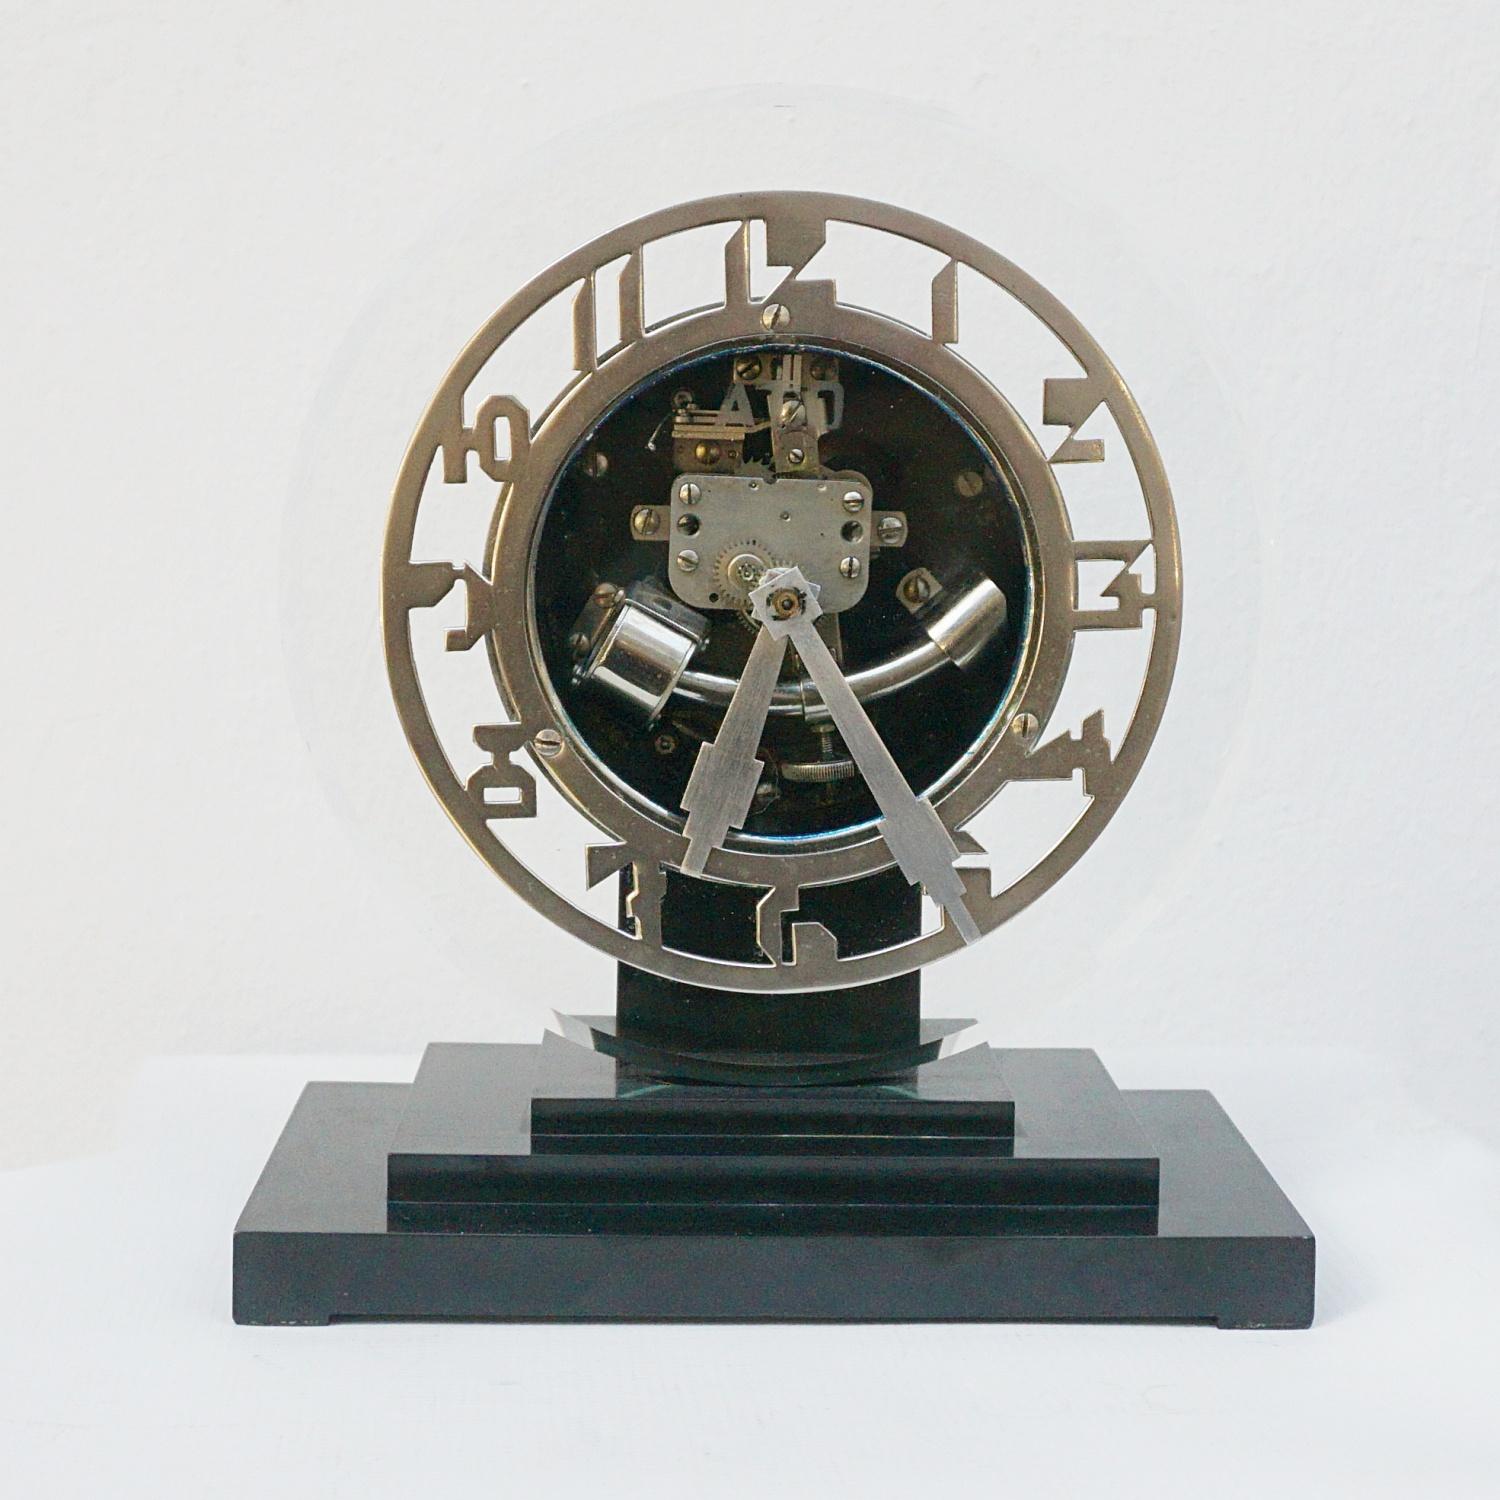 An Art Deco mantel clock by Leon Hatot Fabricants, Paris. Glass fronted with chrome numerals and dials. Set over a stepped bakelite base. 

Dimensions: H 23cm W 19cm D 11cm

Origin: France

Date: Circa 1930

Item Number: 1901232